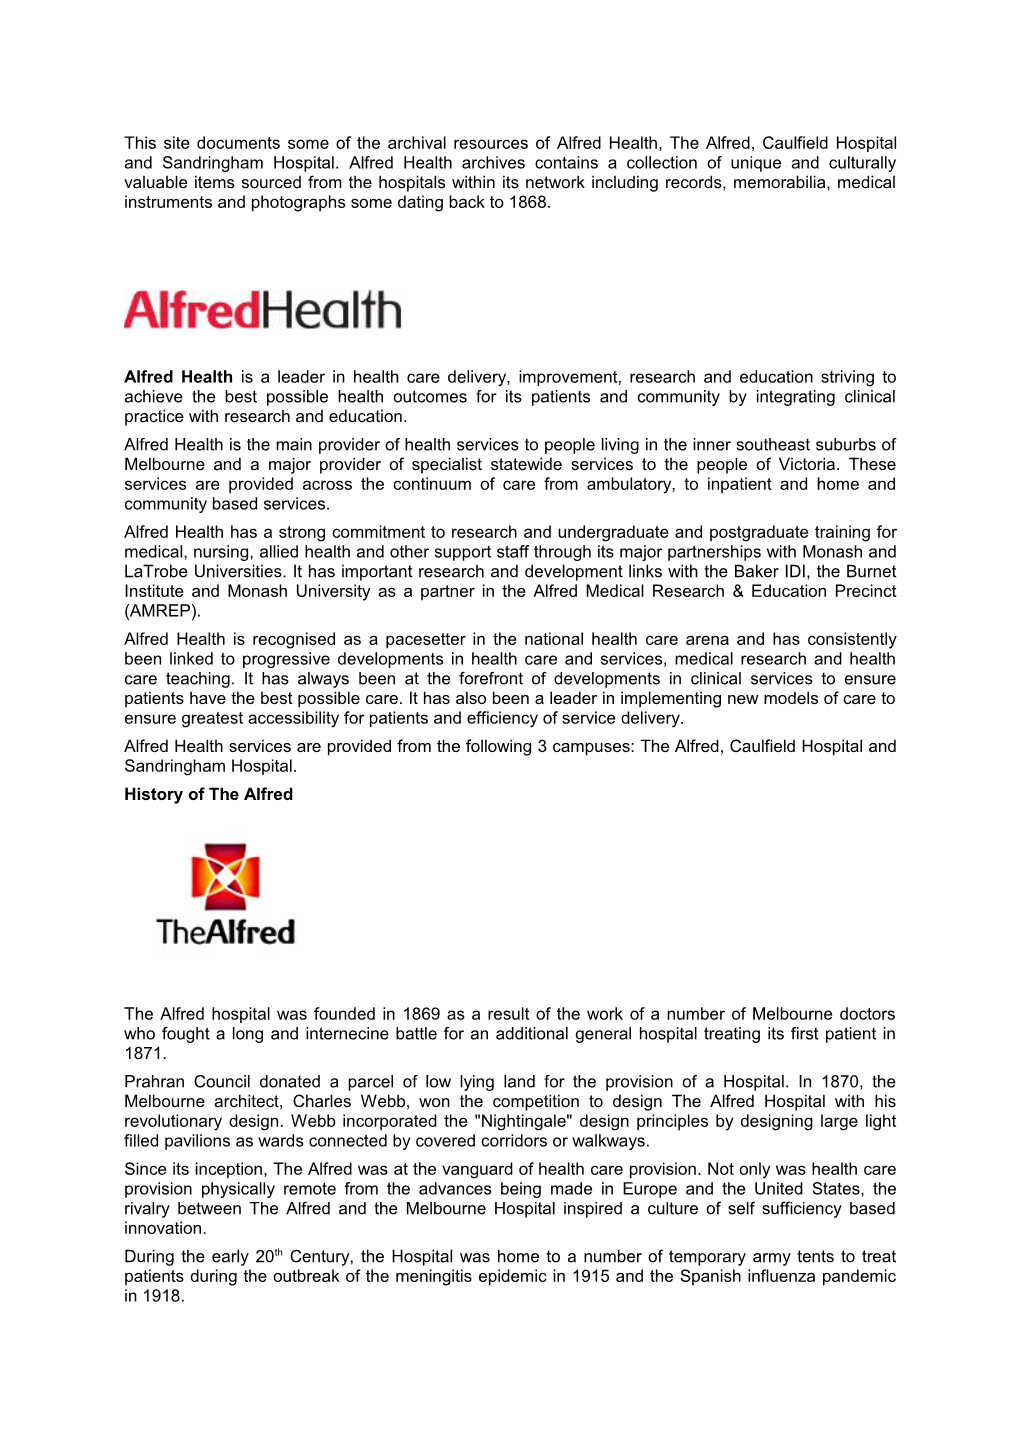 This Site Documents Some of the Archival Resources of Alfred Health, the Alfred, Caulfield